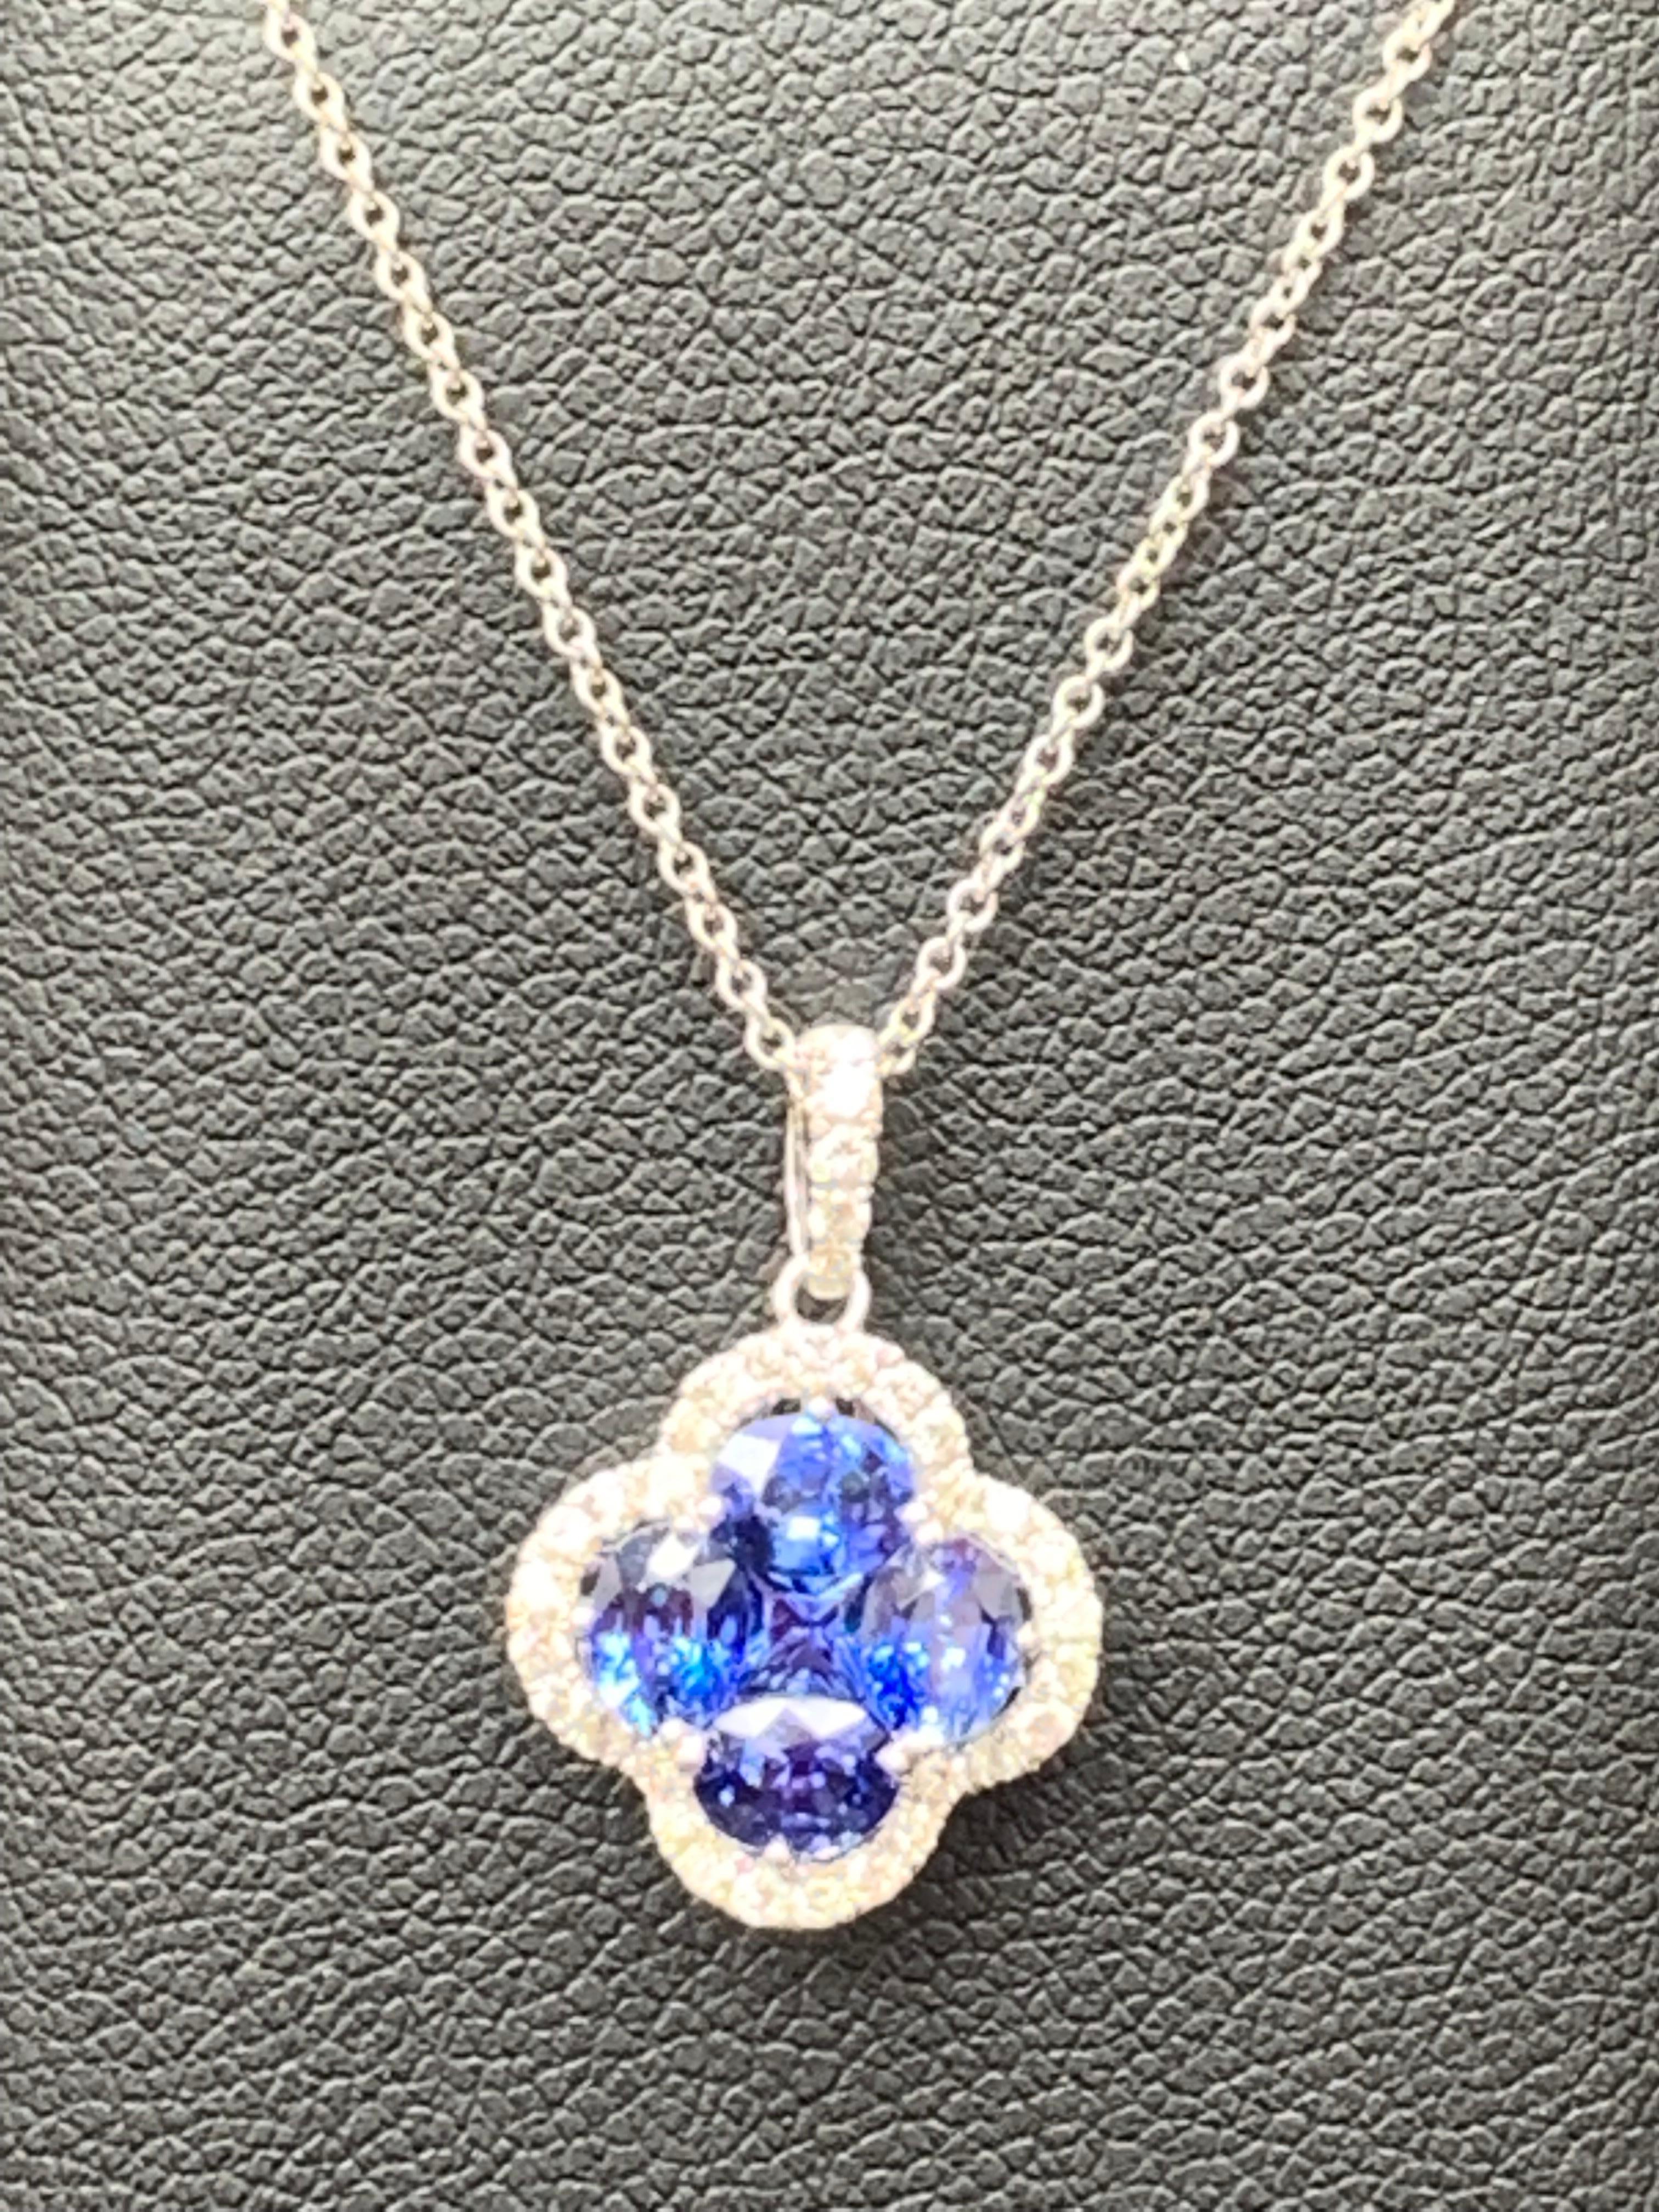 1.33 Carat Oval Cut Blue Sapphire and Diamond Pendant Necklace in 18K White Gold For Sale 1